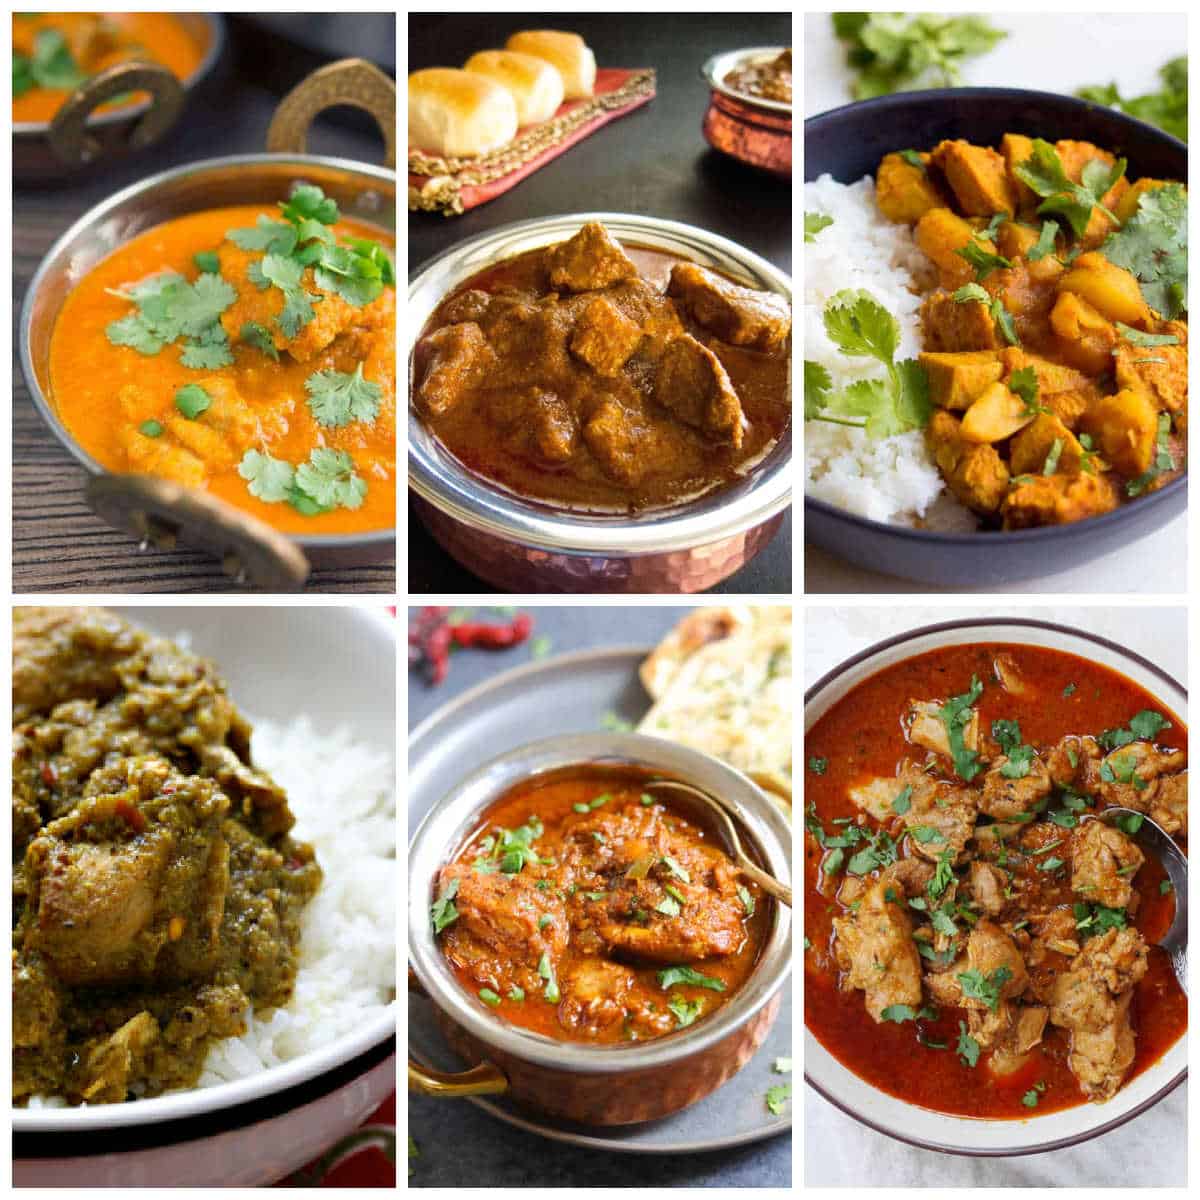 Chicken Vindaloo Recipes, Slow Cooker or Instant Pot, collage of featured recipes.